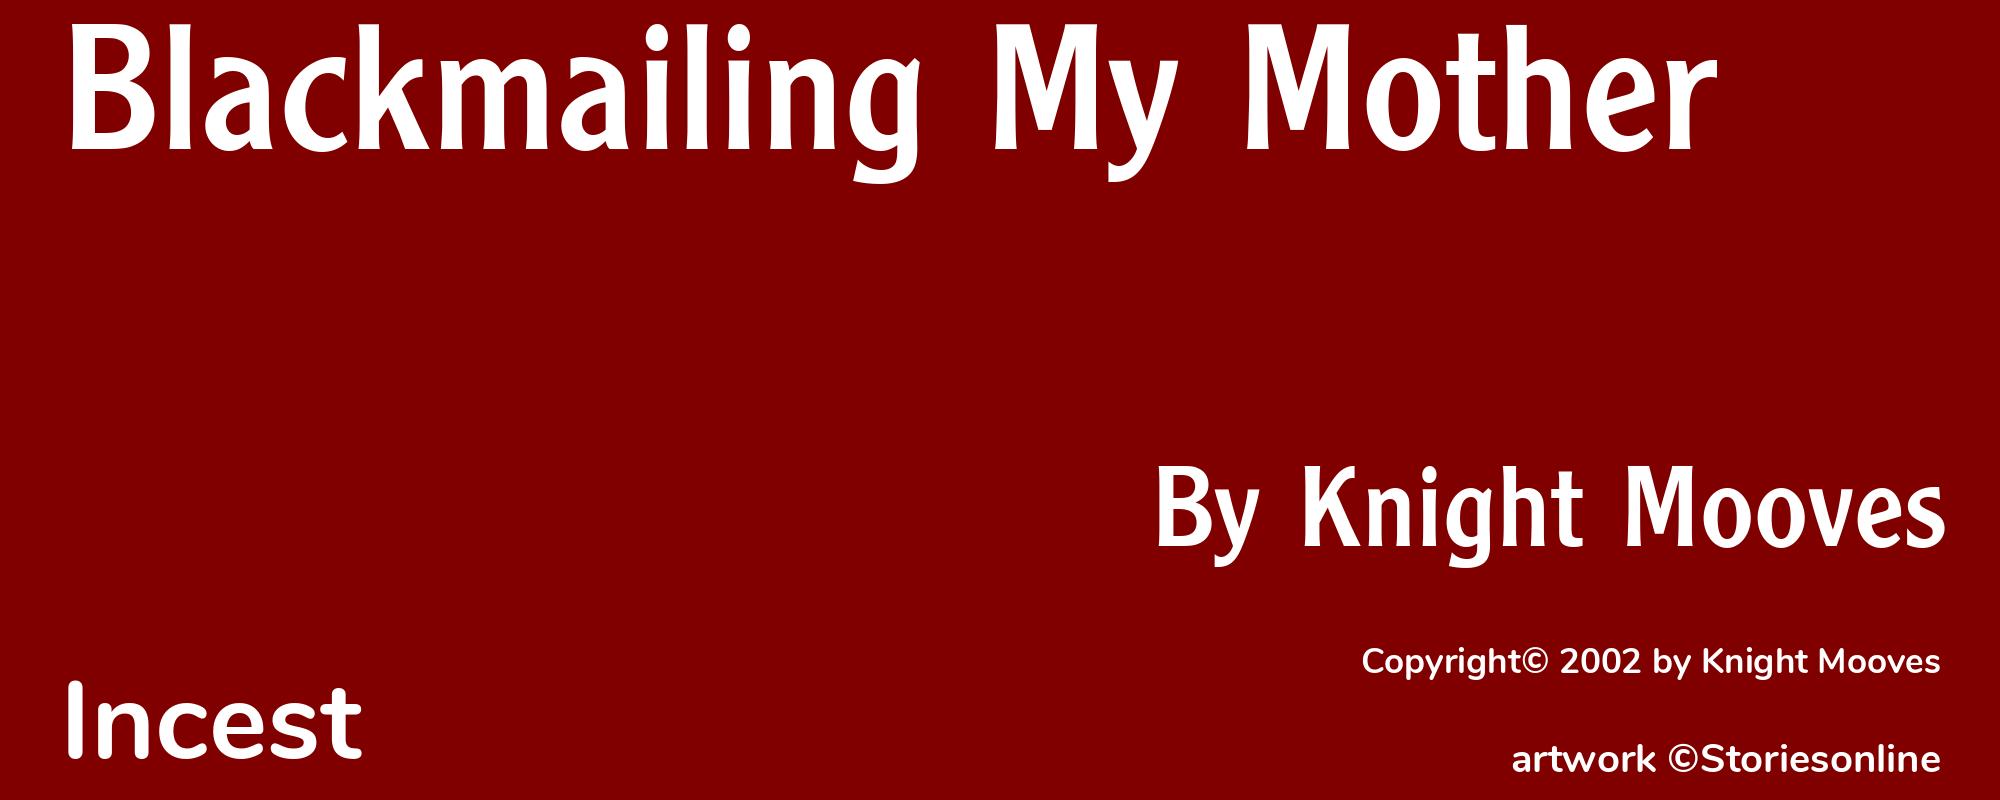 Blackmailing My Mother - Cover